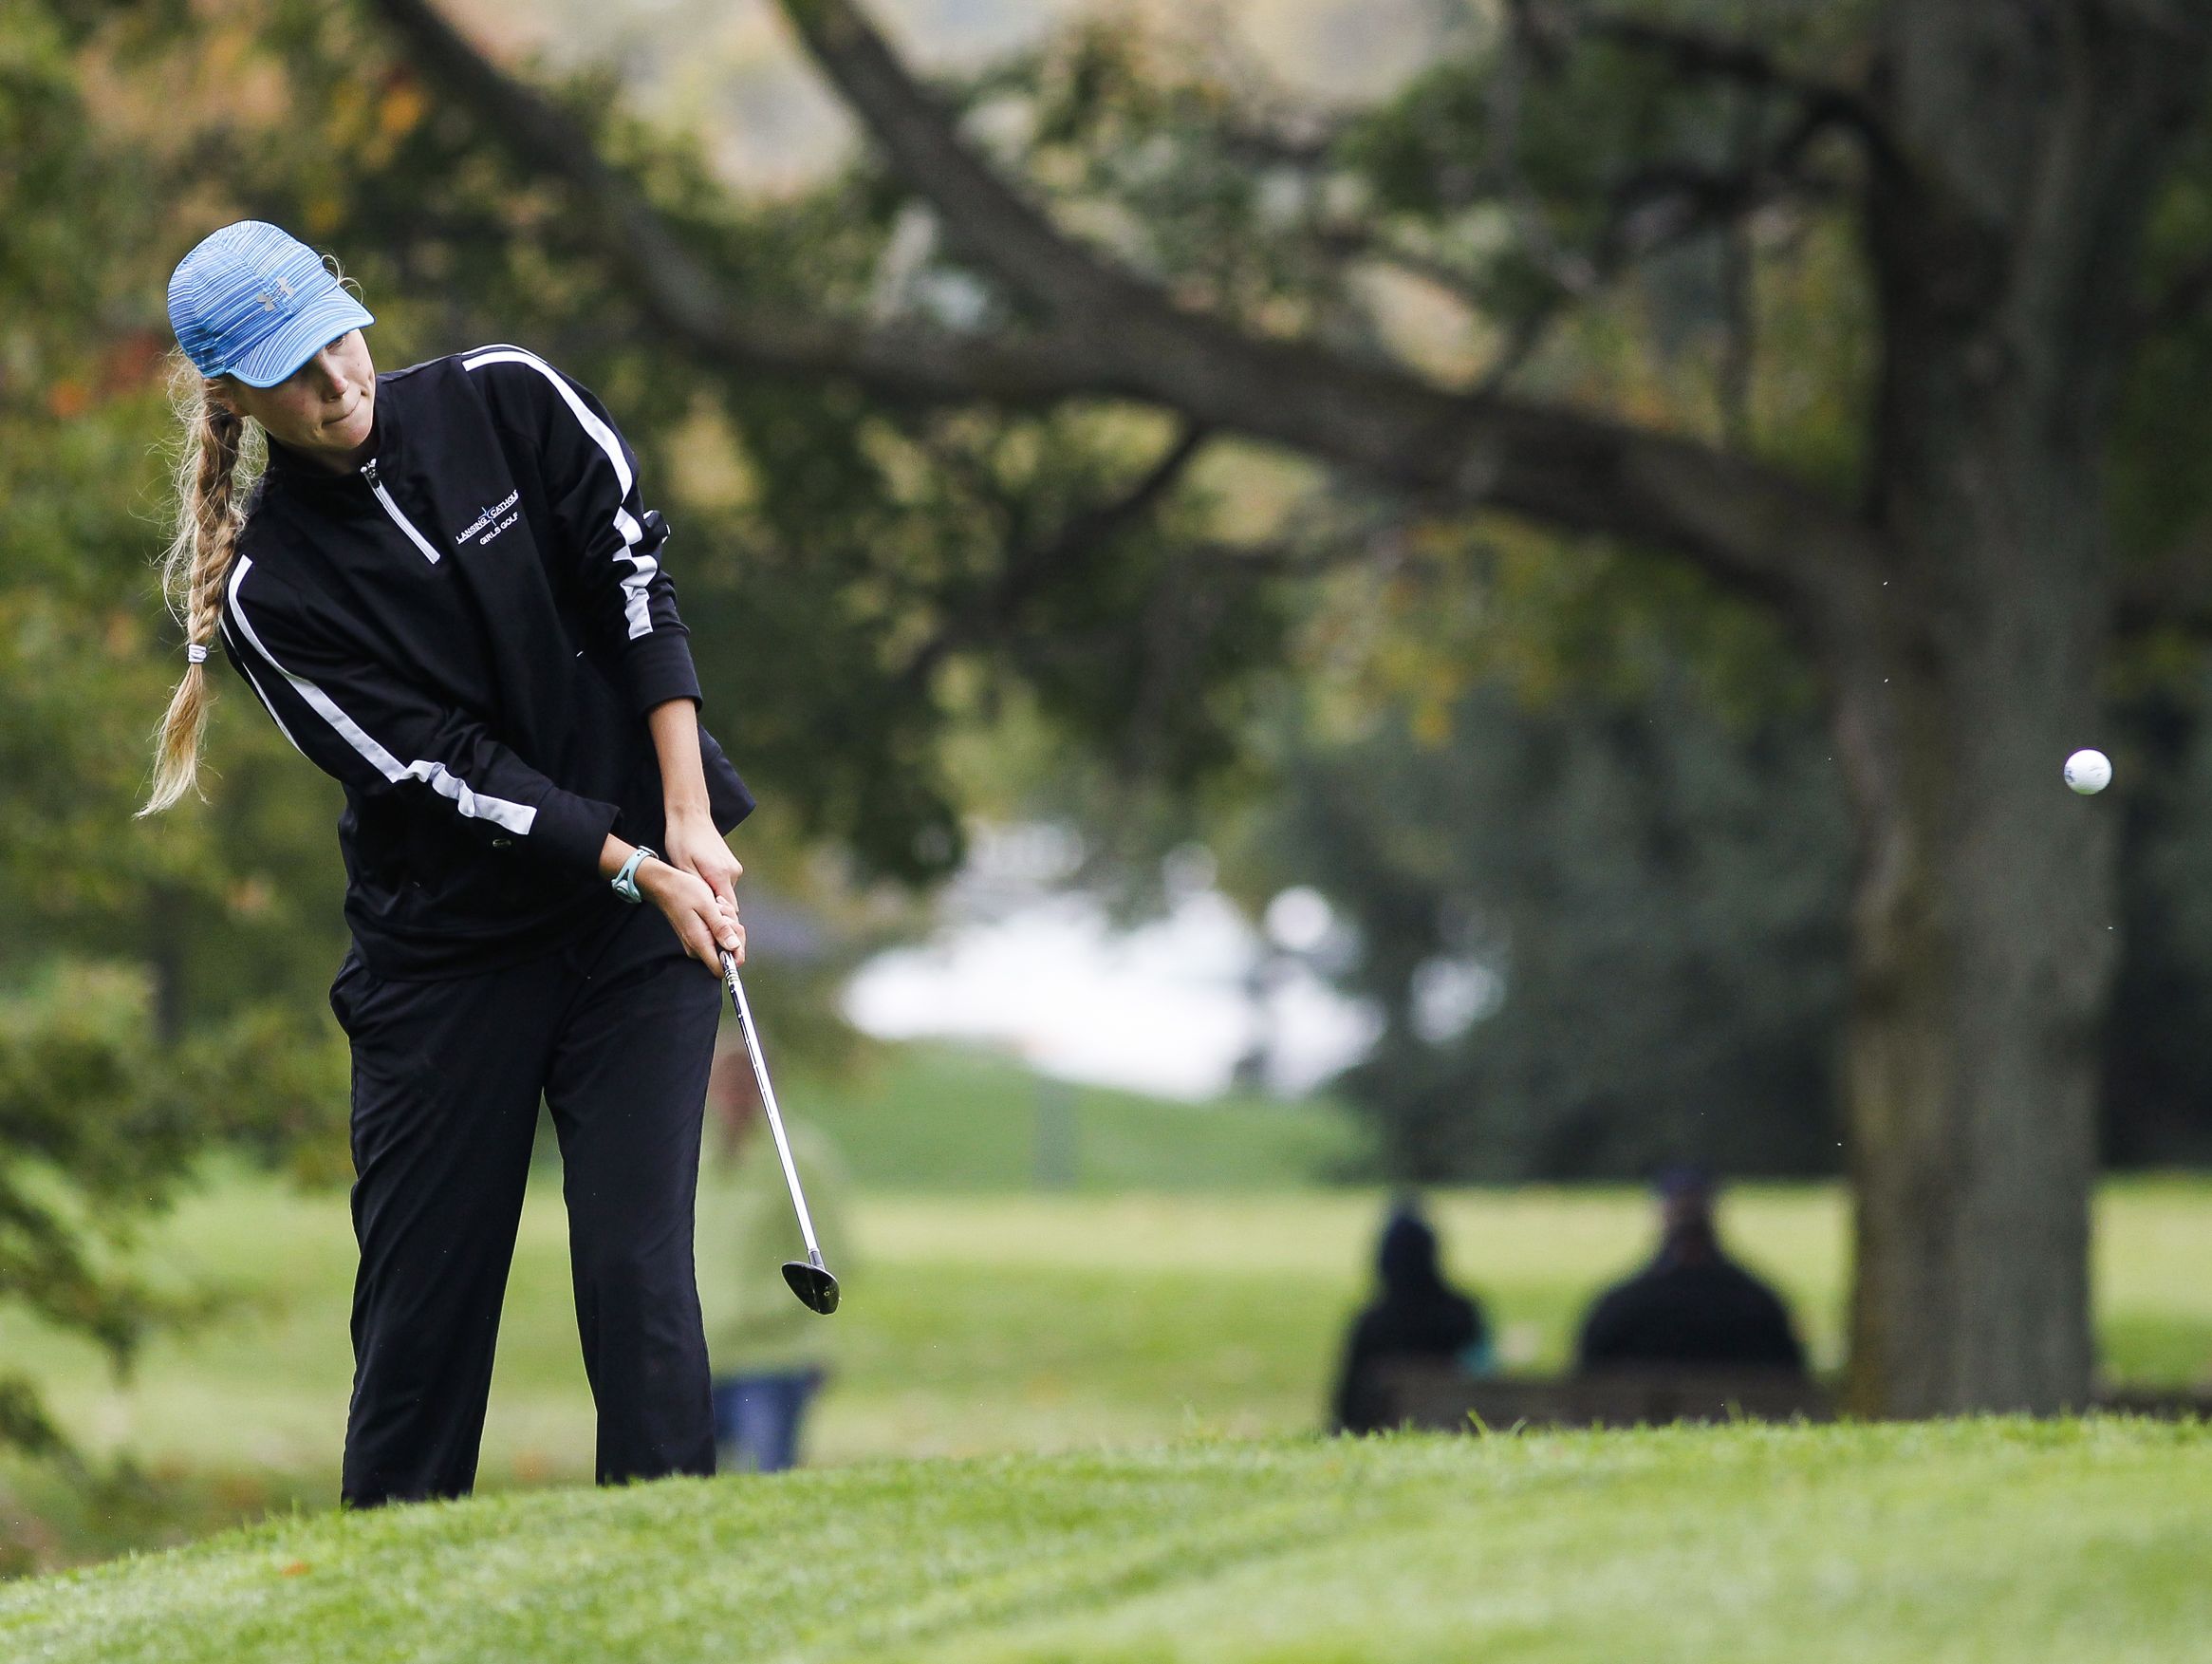 Grace Castle of Lansing Catholic chips her way onto the 18th green during the Div. 4 Girls Golf Finals October 15, 2016, at Forest Akers West at Michigan State University.